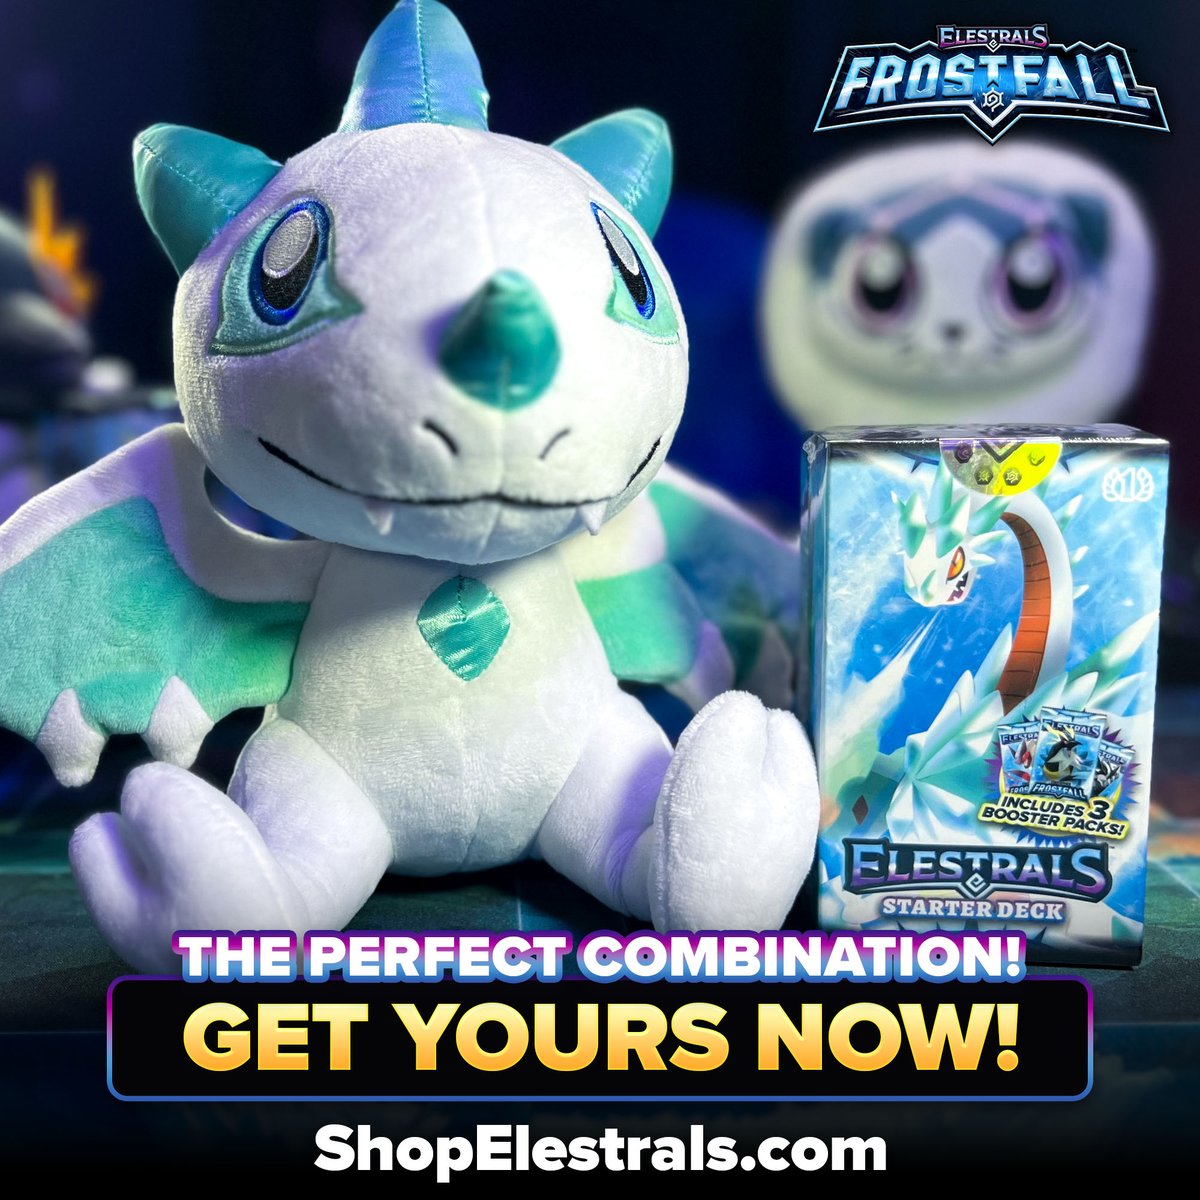 Scorch your opponents with the Kryoscorch Starter Deck and then give your Kryoling PLushie a hug right after! The perfect combination! 🤗

Pre-order your Kryoling Plushie and Kryoscorch Starter Deck today!:

shopelestrals.com/products/kryol…

shopelestrals.com/products/kryos…

#Elestrals #CardGame…